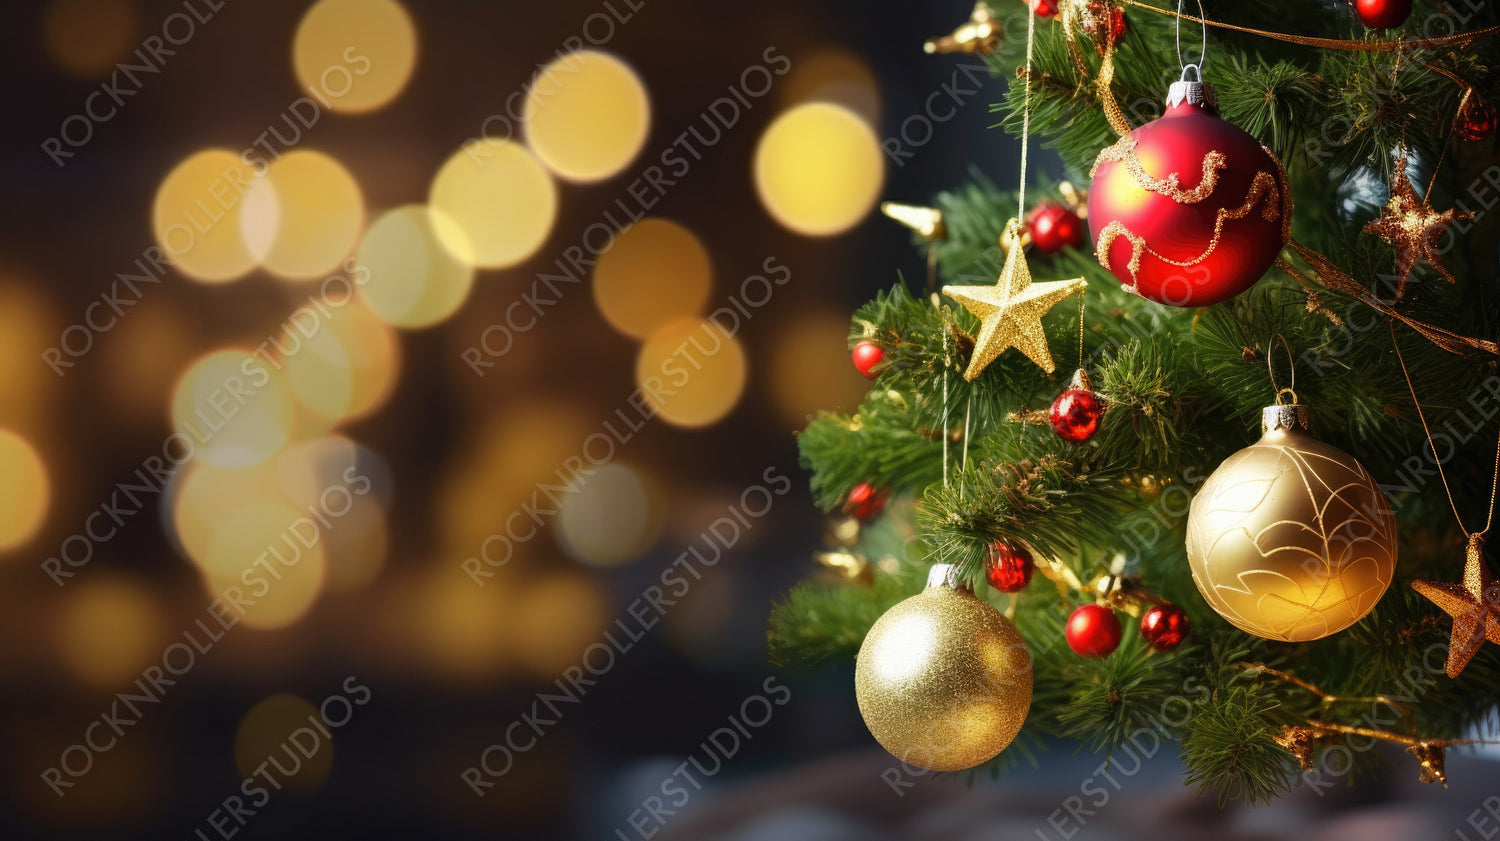 Festive green Christmas tree decorated with gold and red balls with soft focus in evening and beautiful dark blurred defocused sparkling background with golden highlights, copy space.